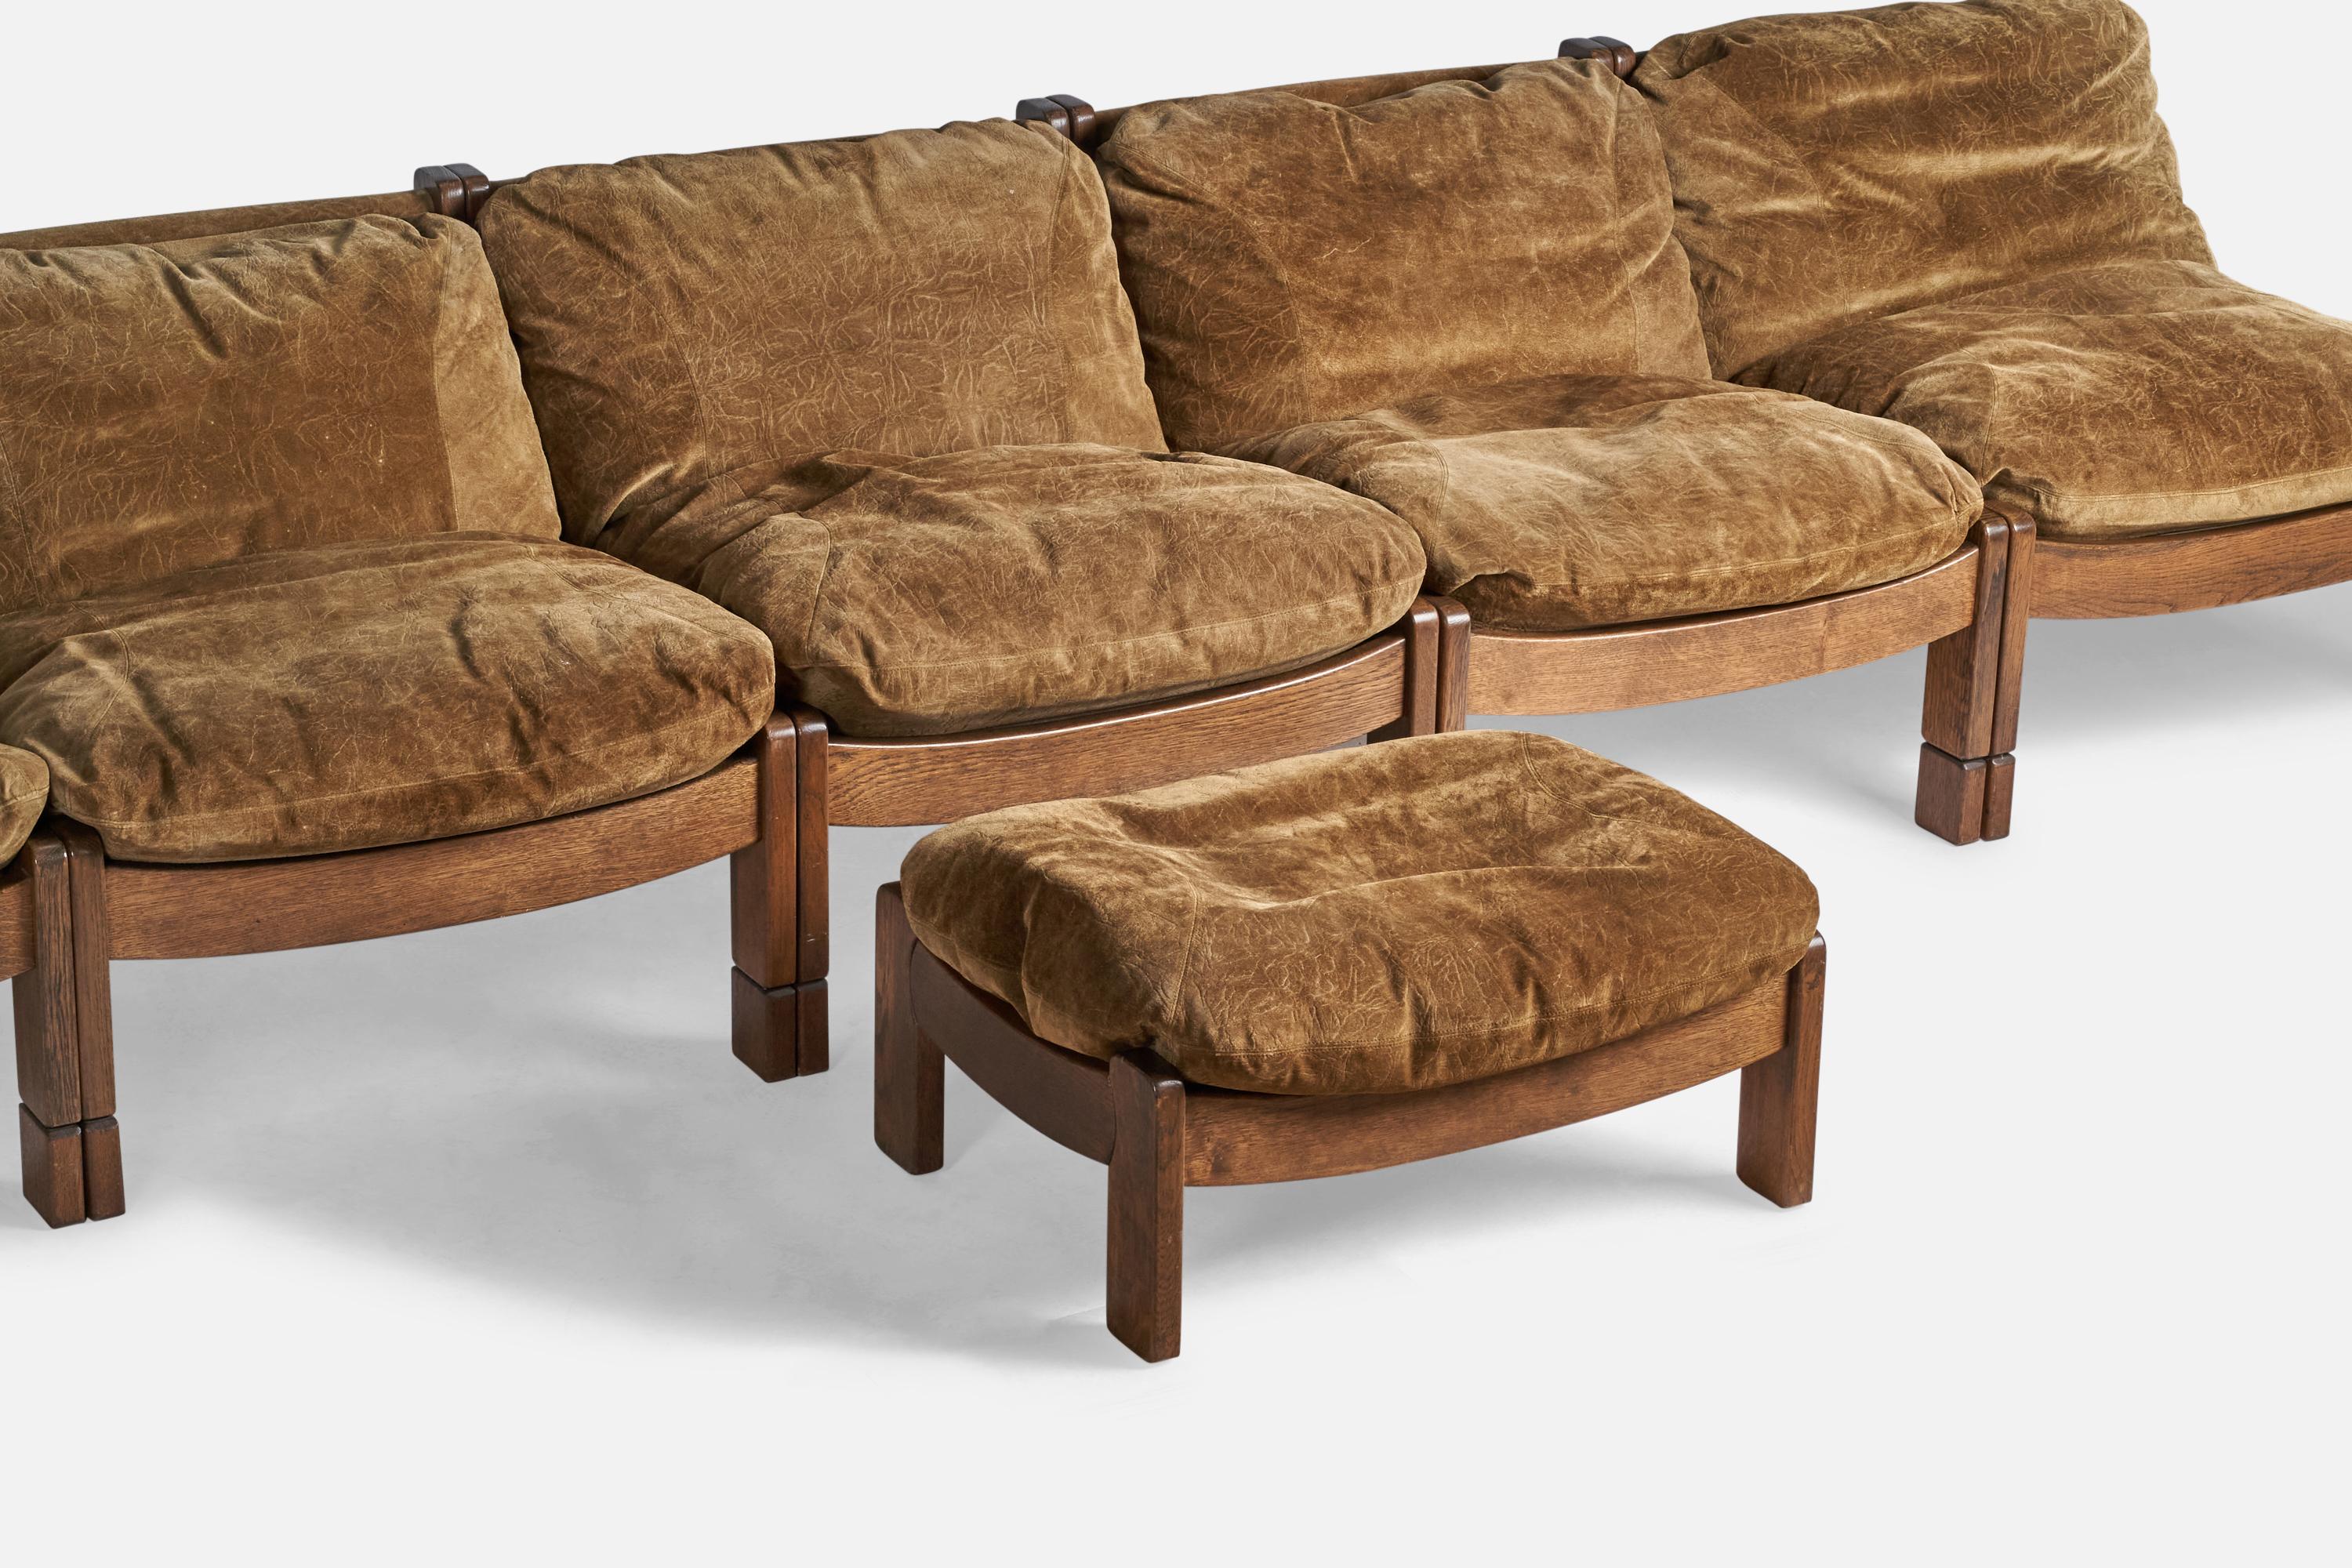 Mid-20th Century Spanish Designer, Sectional Sofa & Ottoman, Oak, Suede, Spain, 1950s For Sale